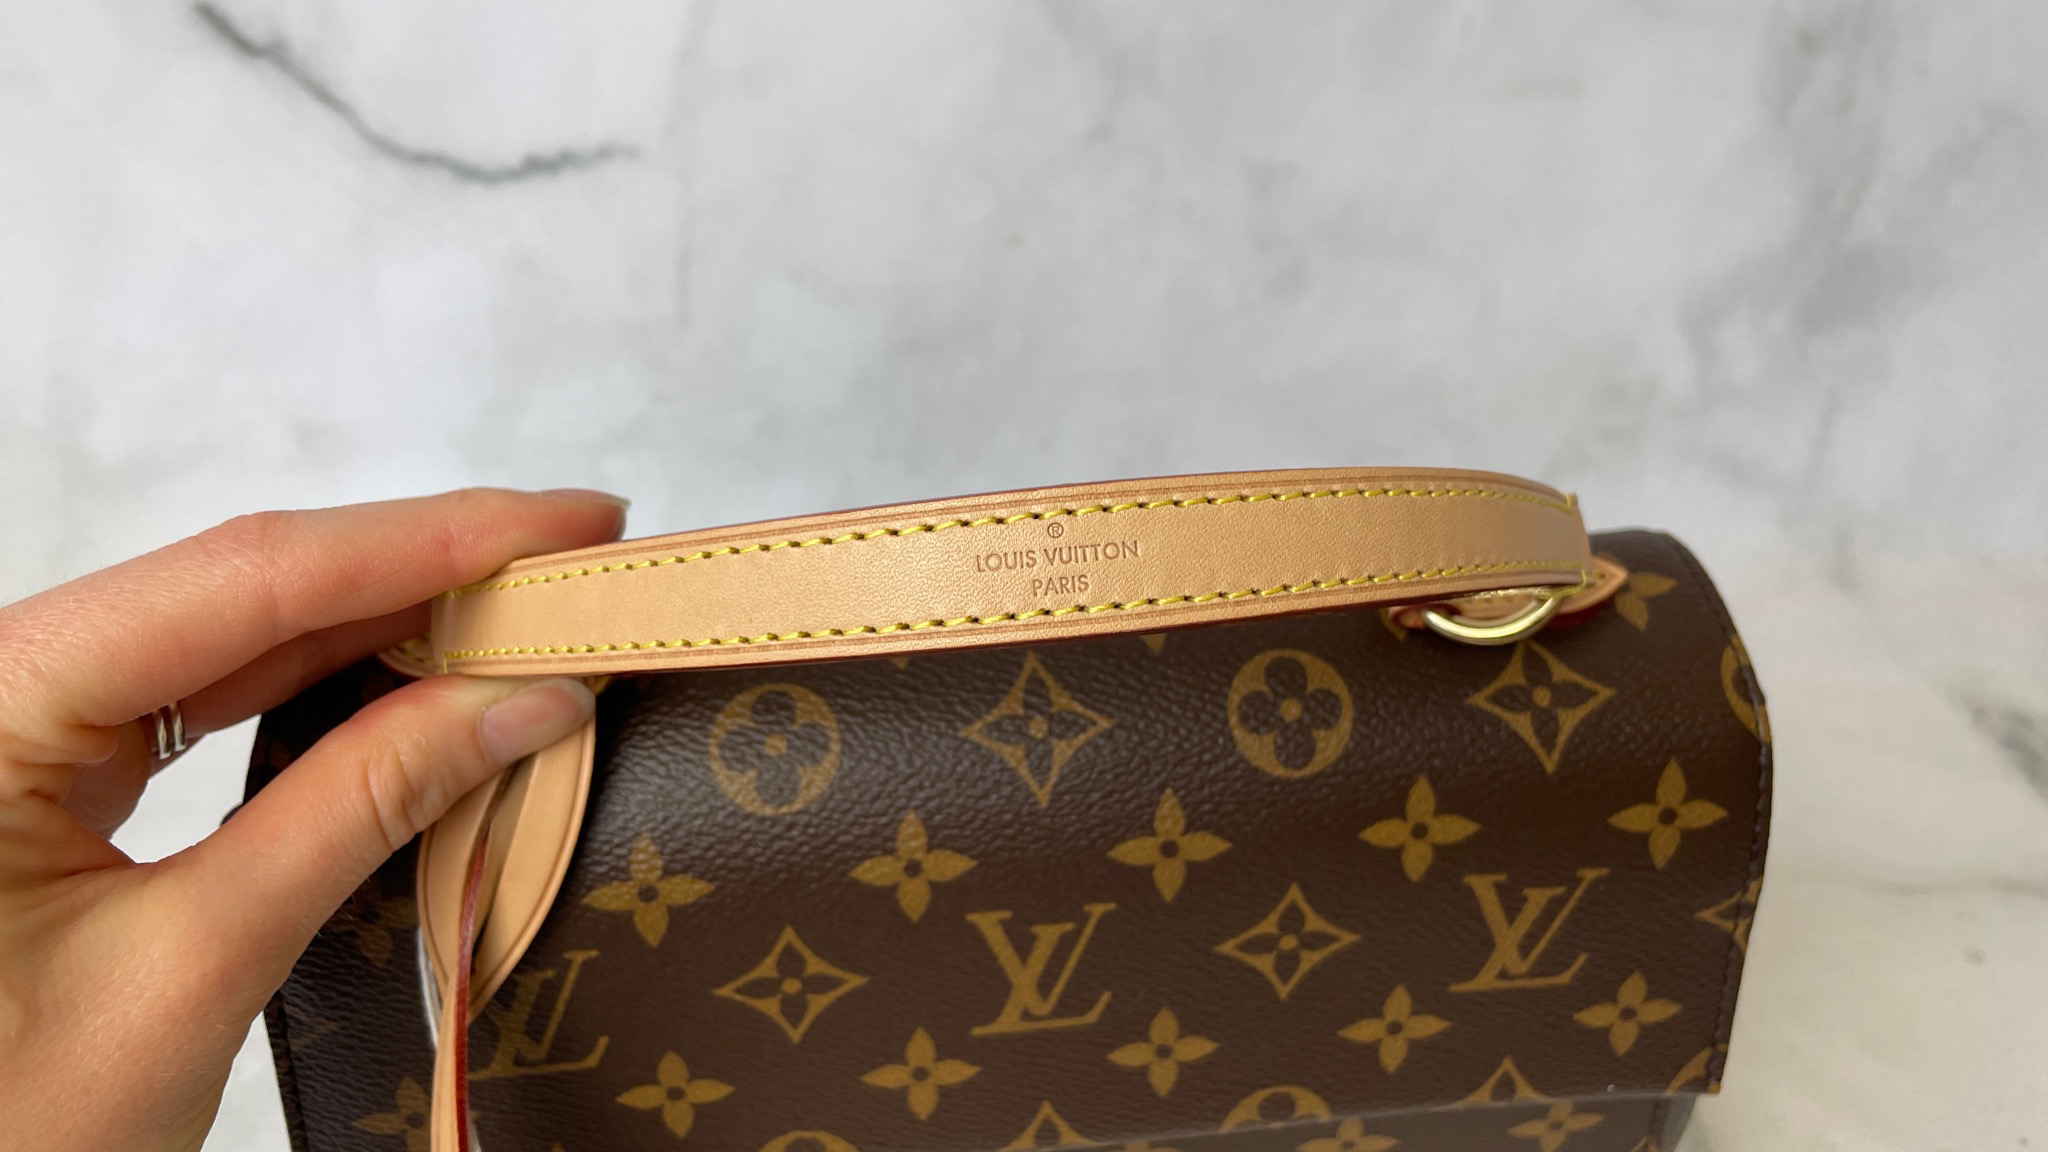 Louis Vuitton Cluny BB, Monogram with Fuchsia Strap, Preowned in